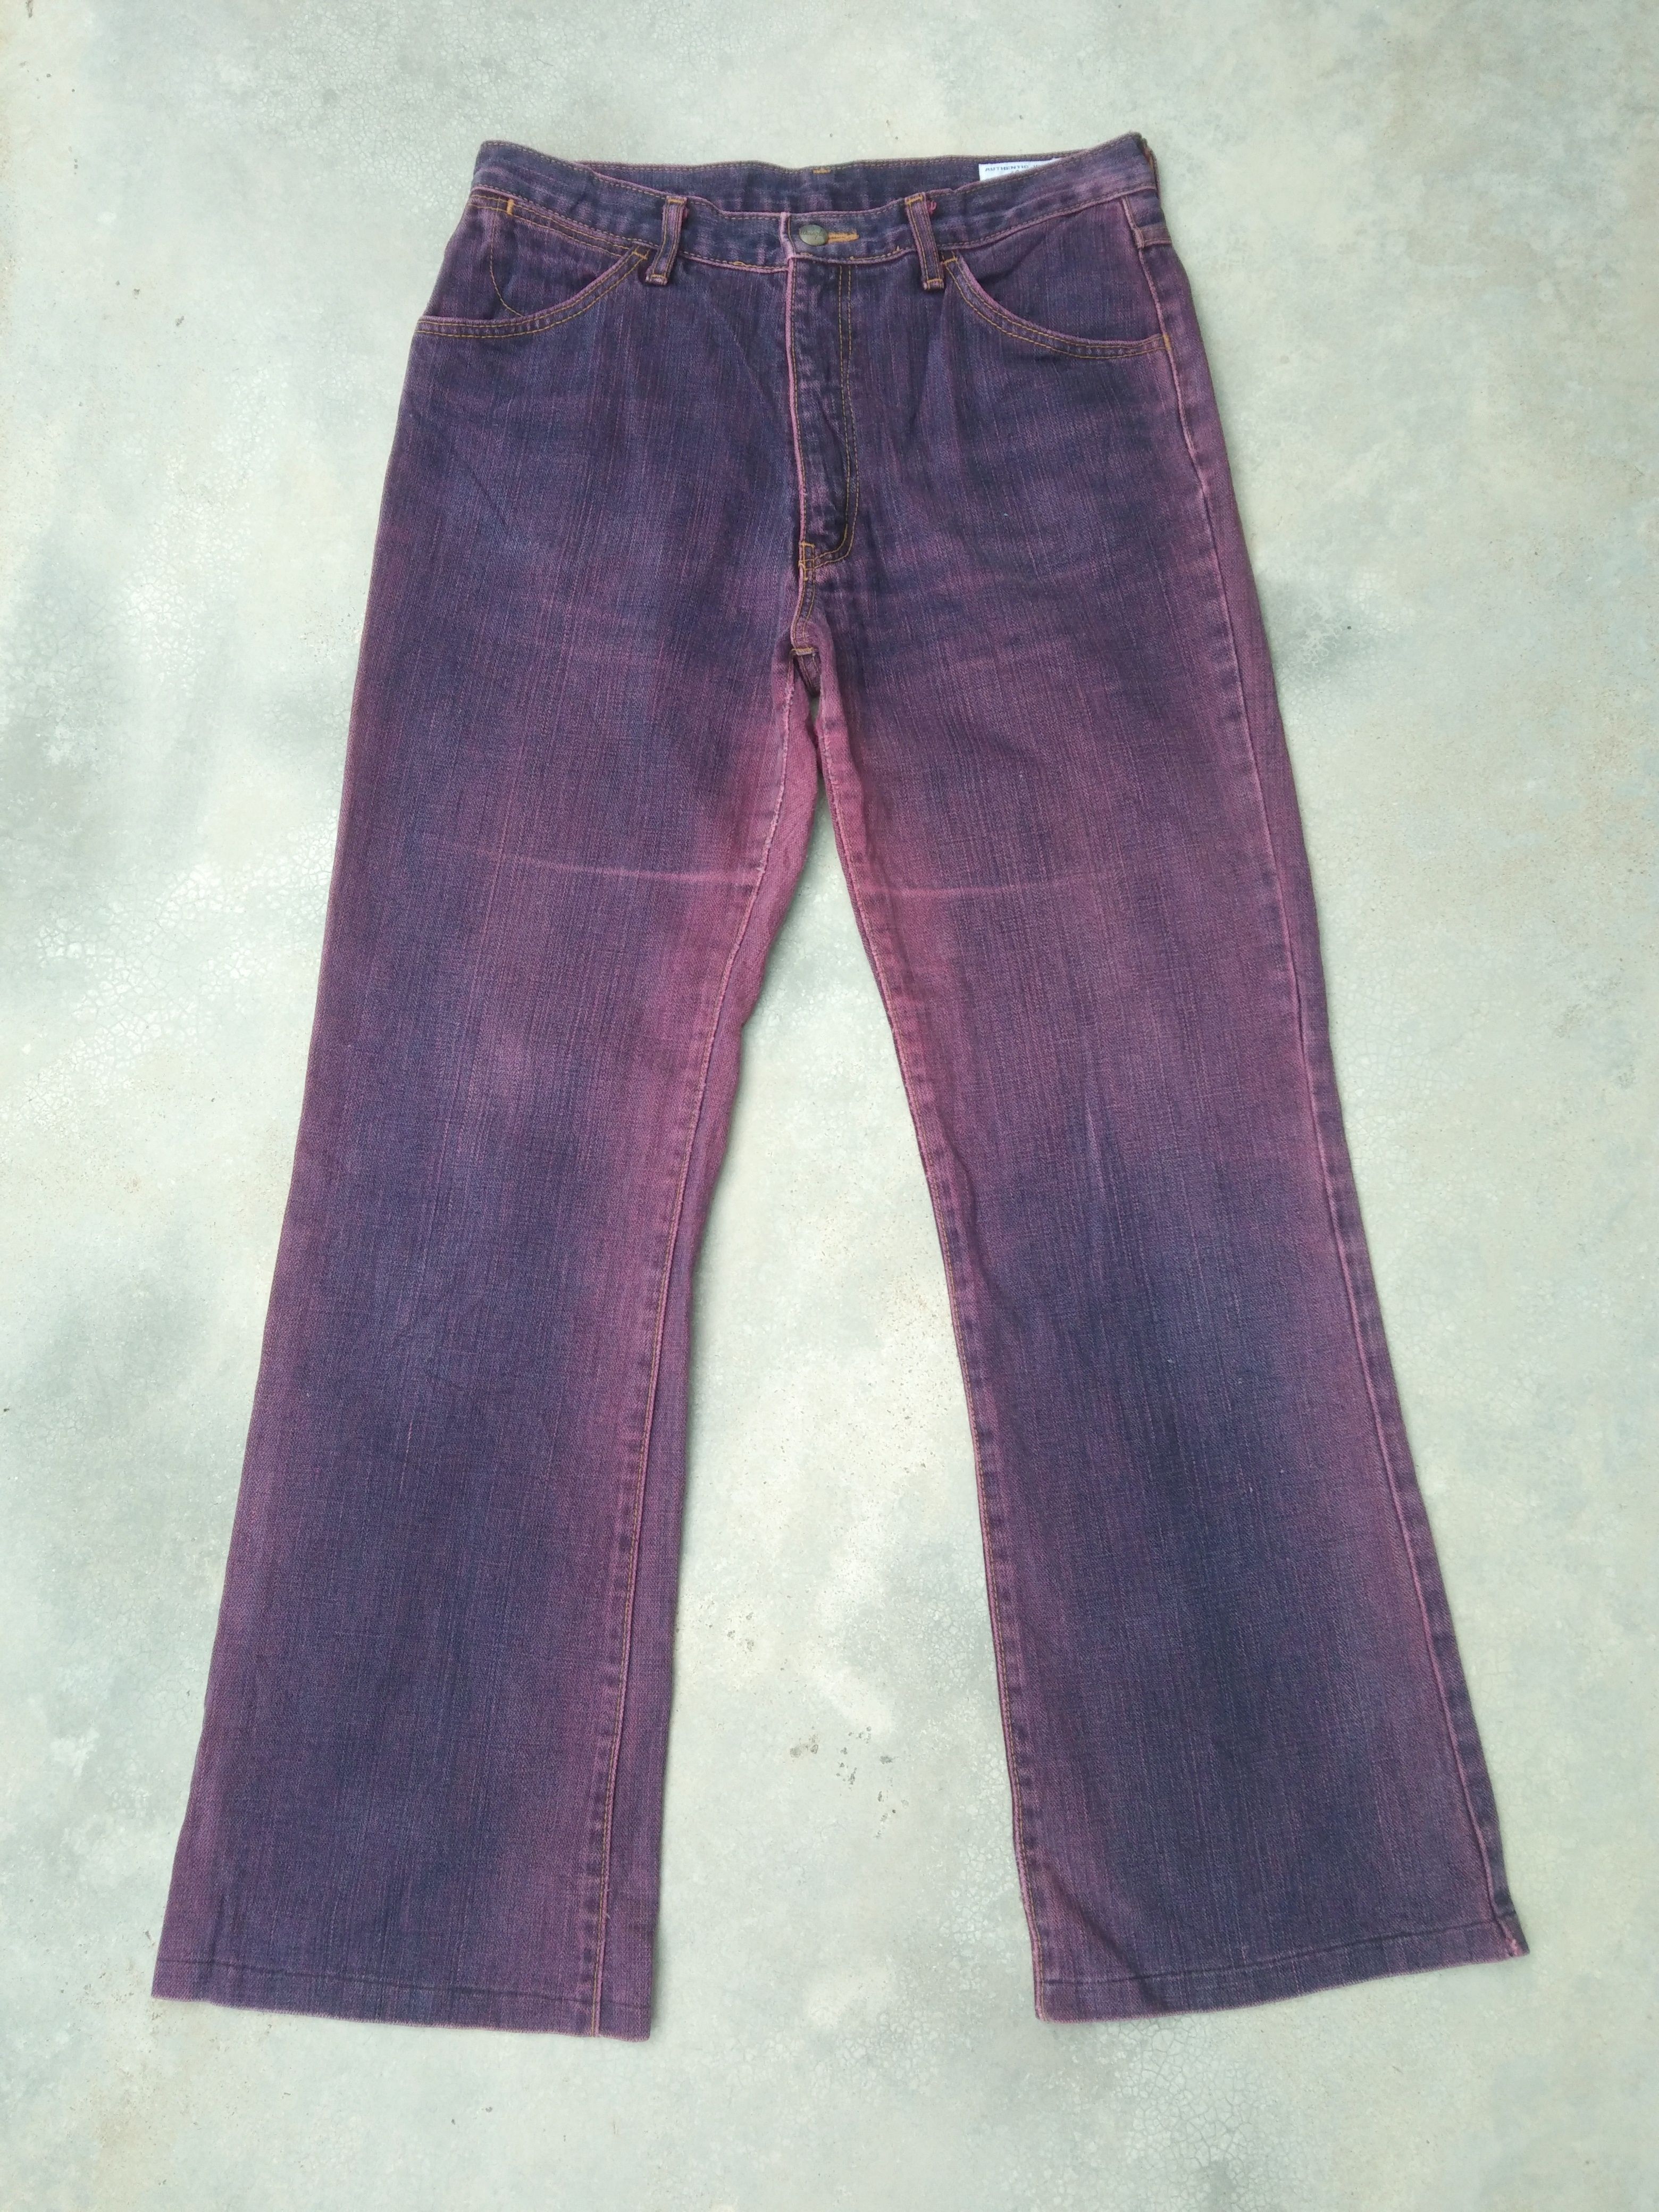 Pre-owned Jean X Vintage Distressed Wrangler Purple Flared Jeans 30x28.5